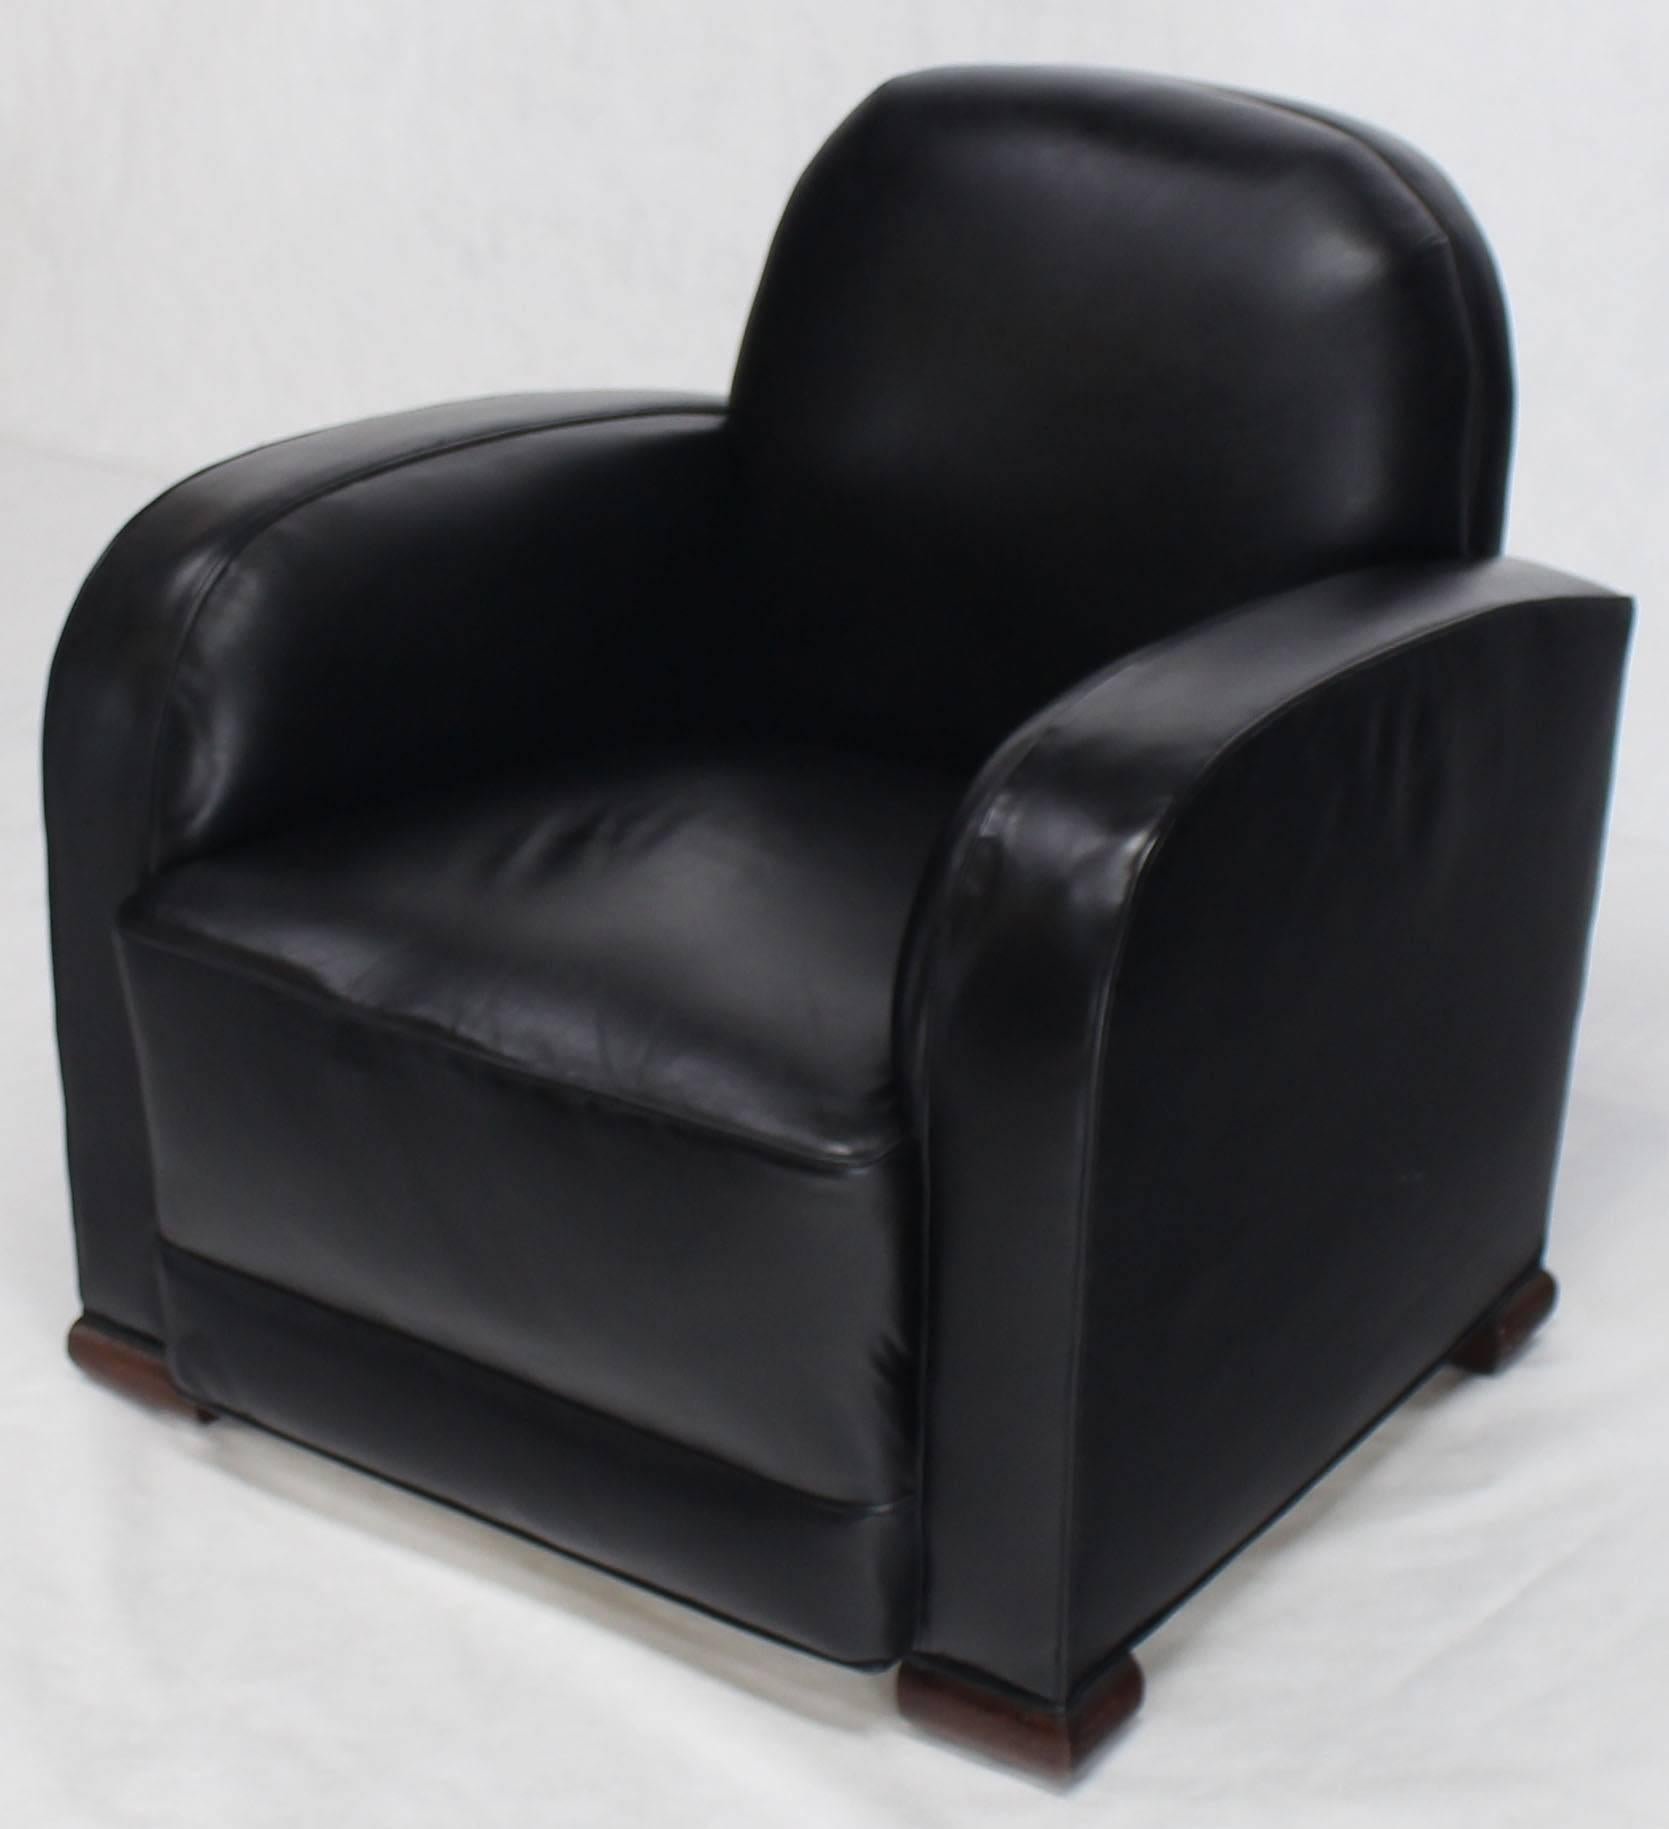 Pair of Black Leather Thick Arm Rests Lounge Deco Tank Chairs  1